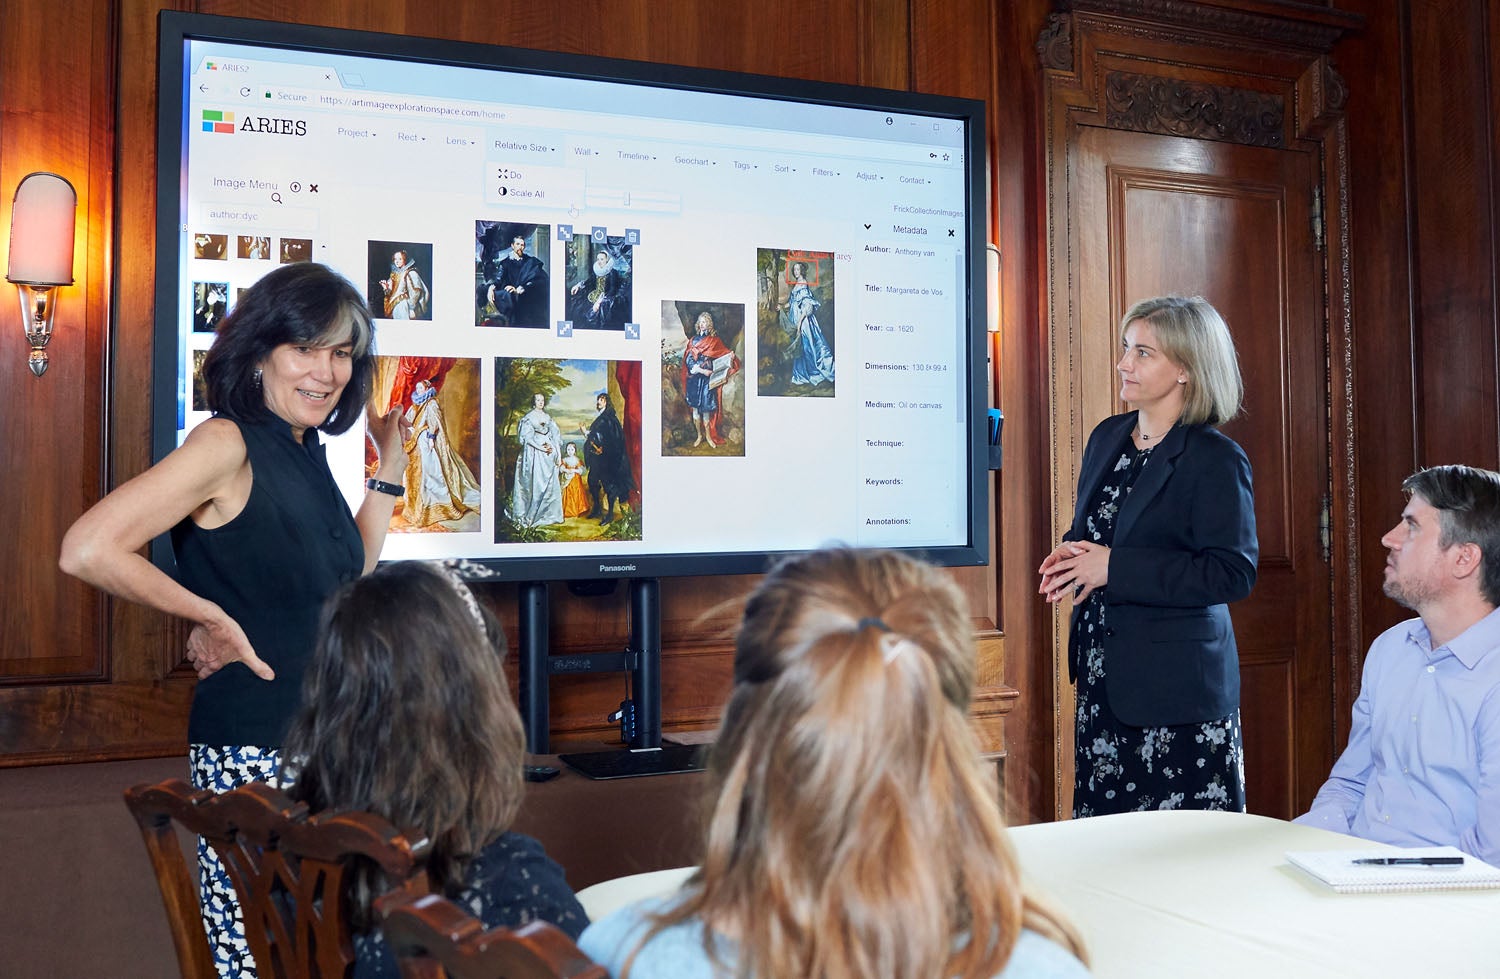 Two women in front of a screen demonstrate how to use a tool for digital image organization and manipulation.